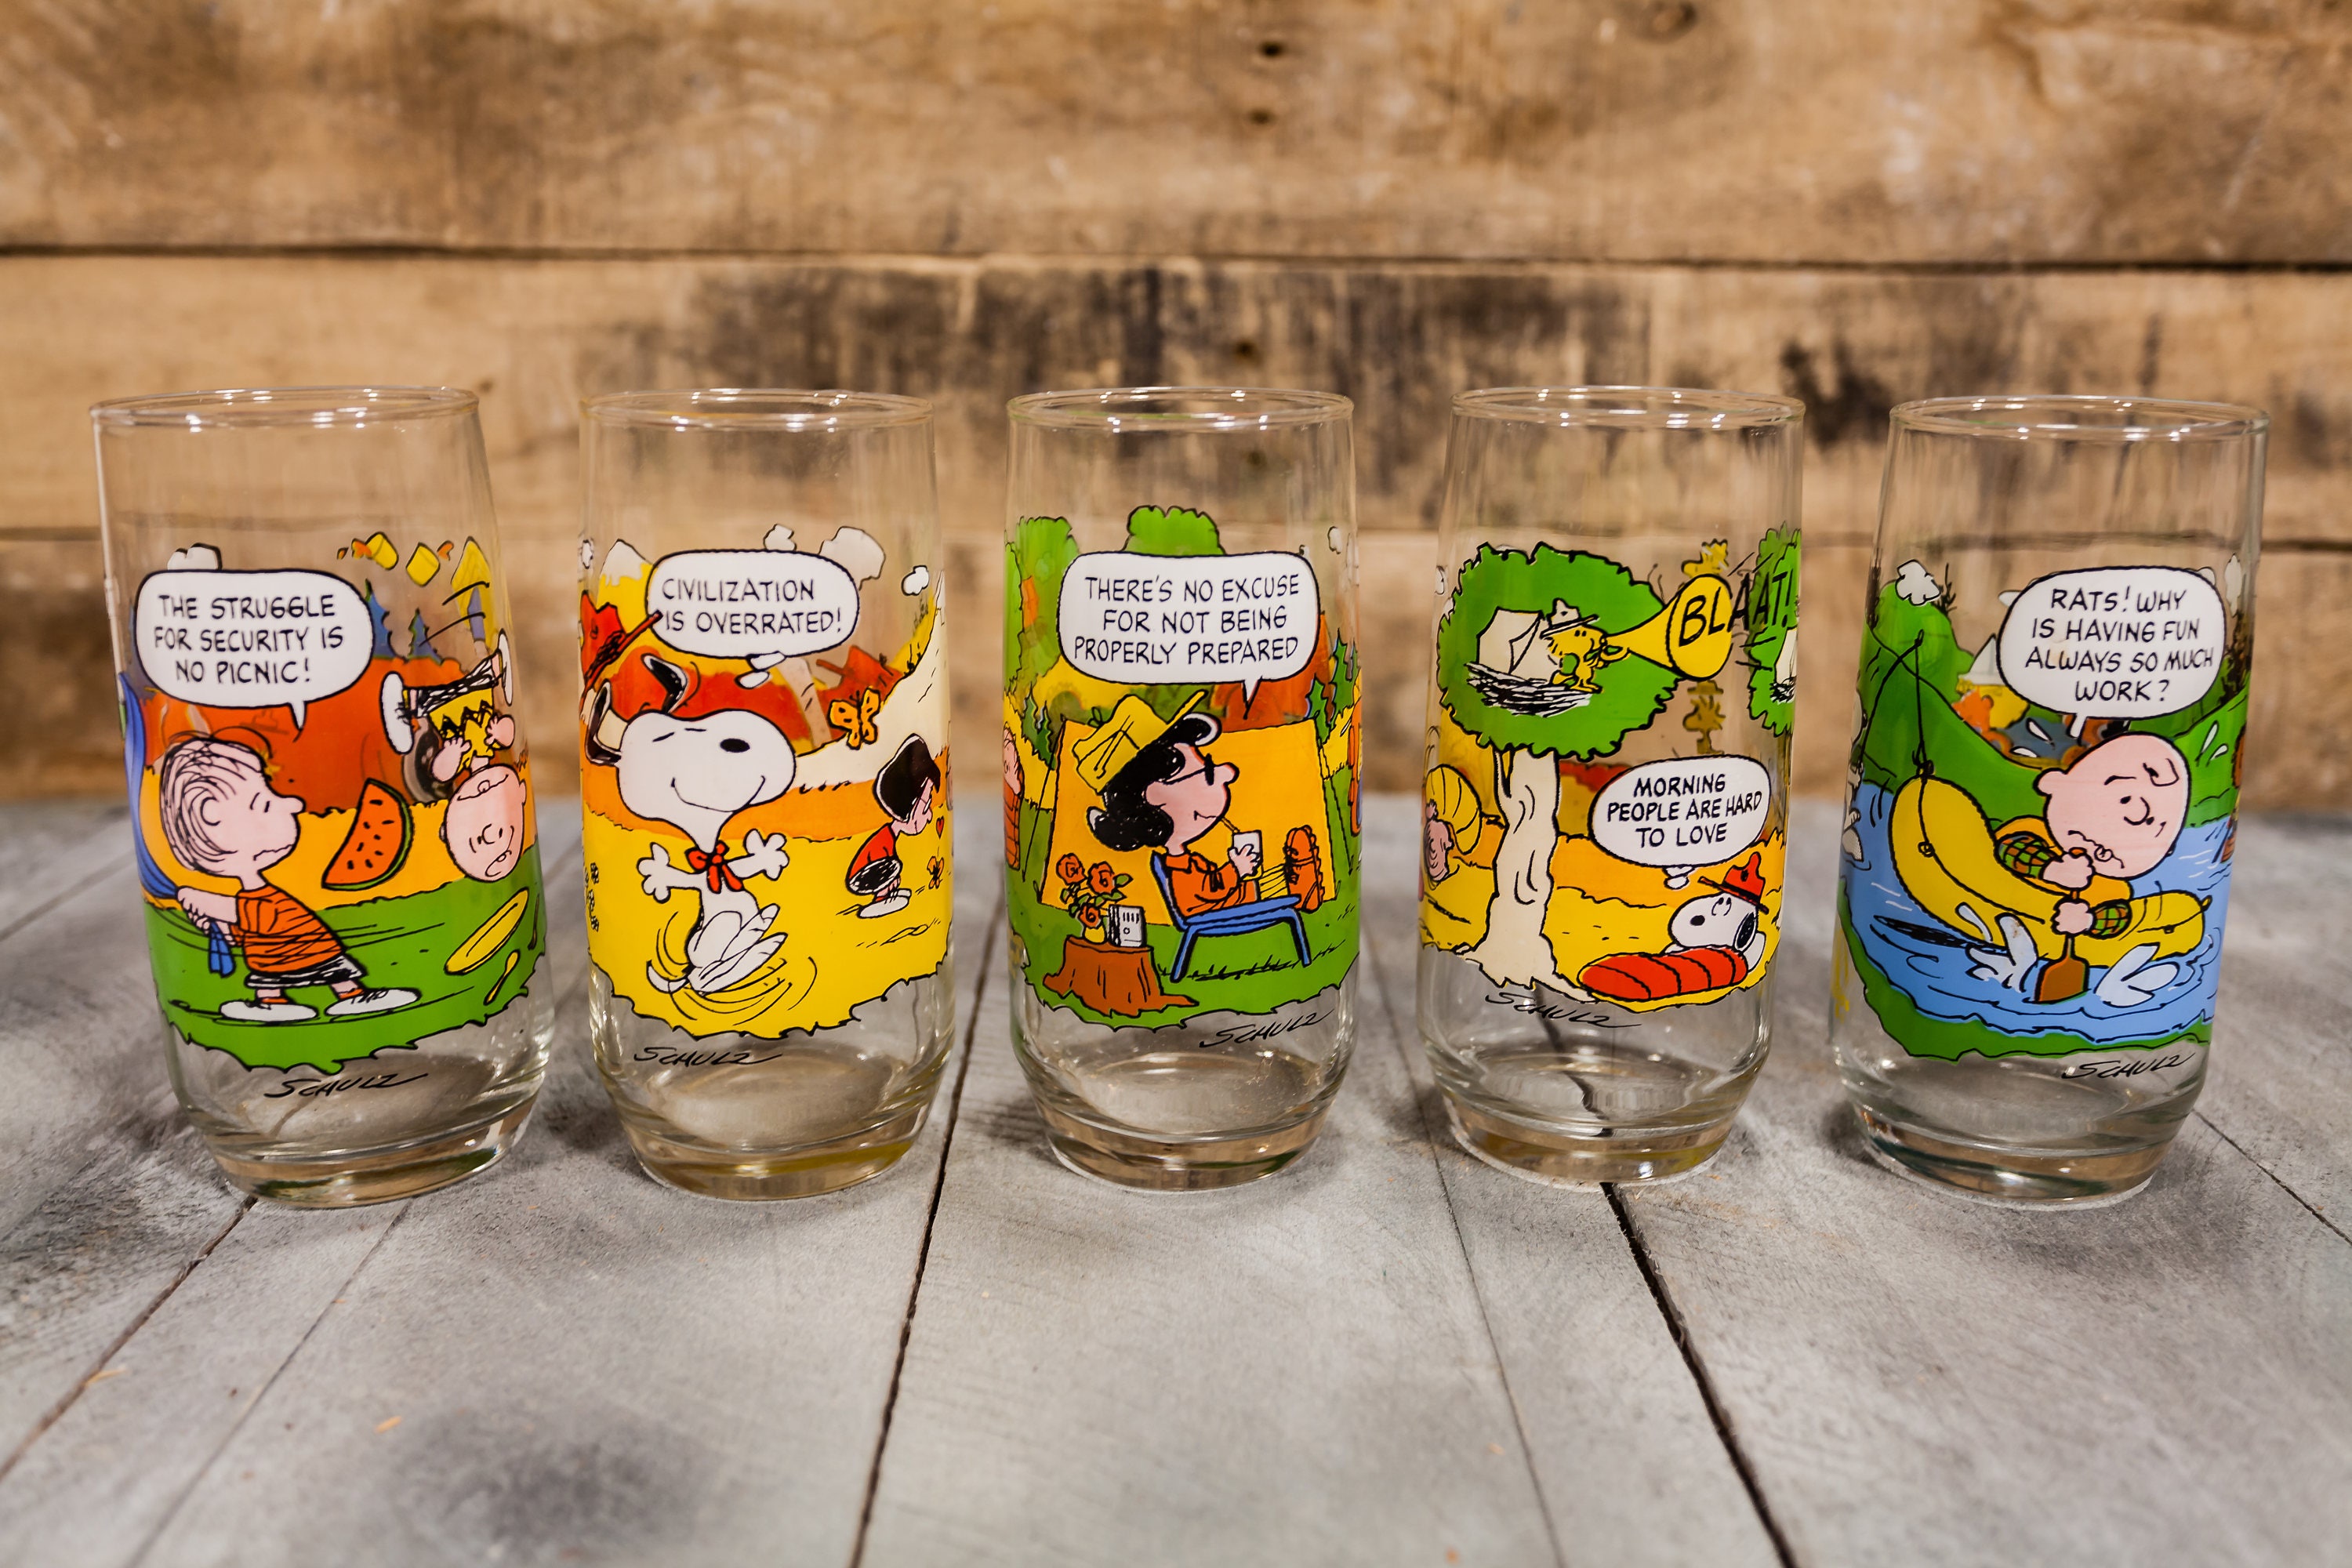 McDonald's Camp Snoopy Peanuts Collection Set of 5 Charlie Brown Vintage Glasses 